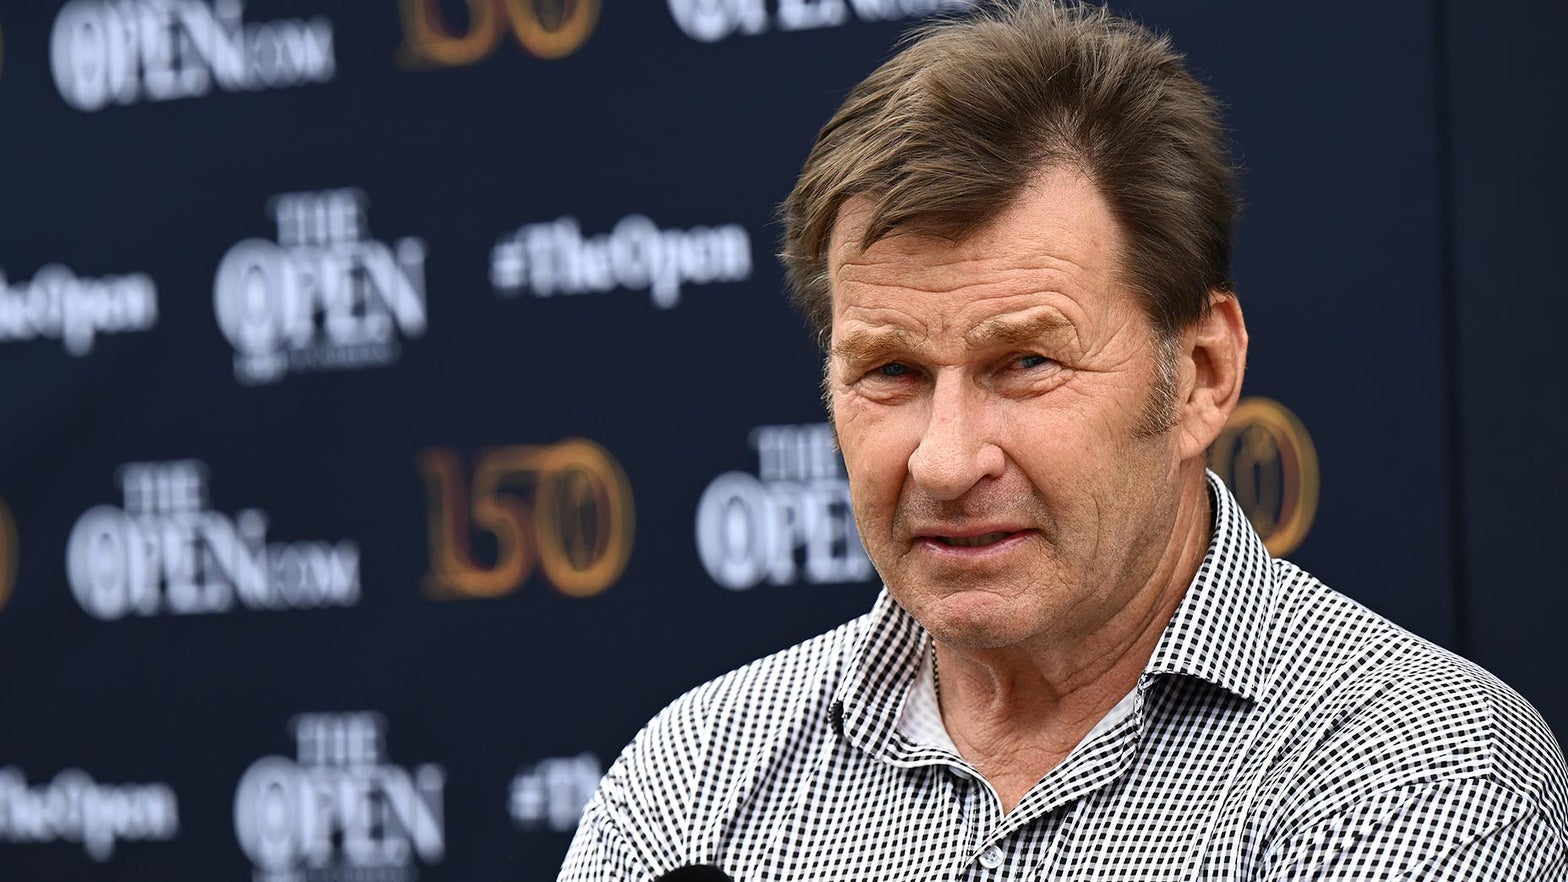 He’s back! Nick Faldo to return to Masters TV coverage in 2023